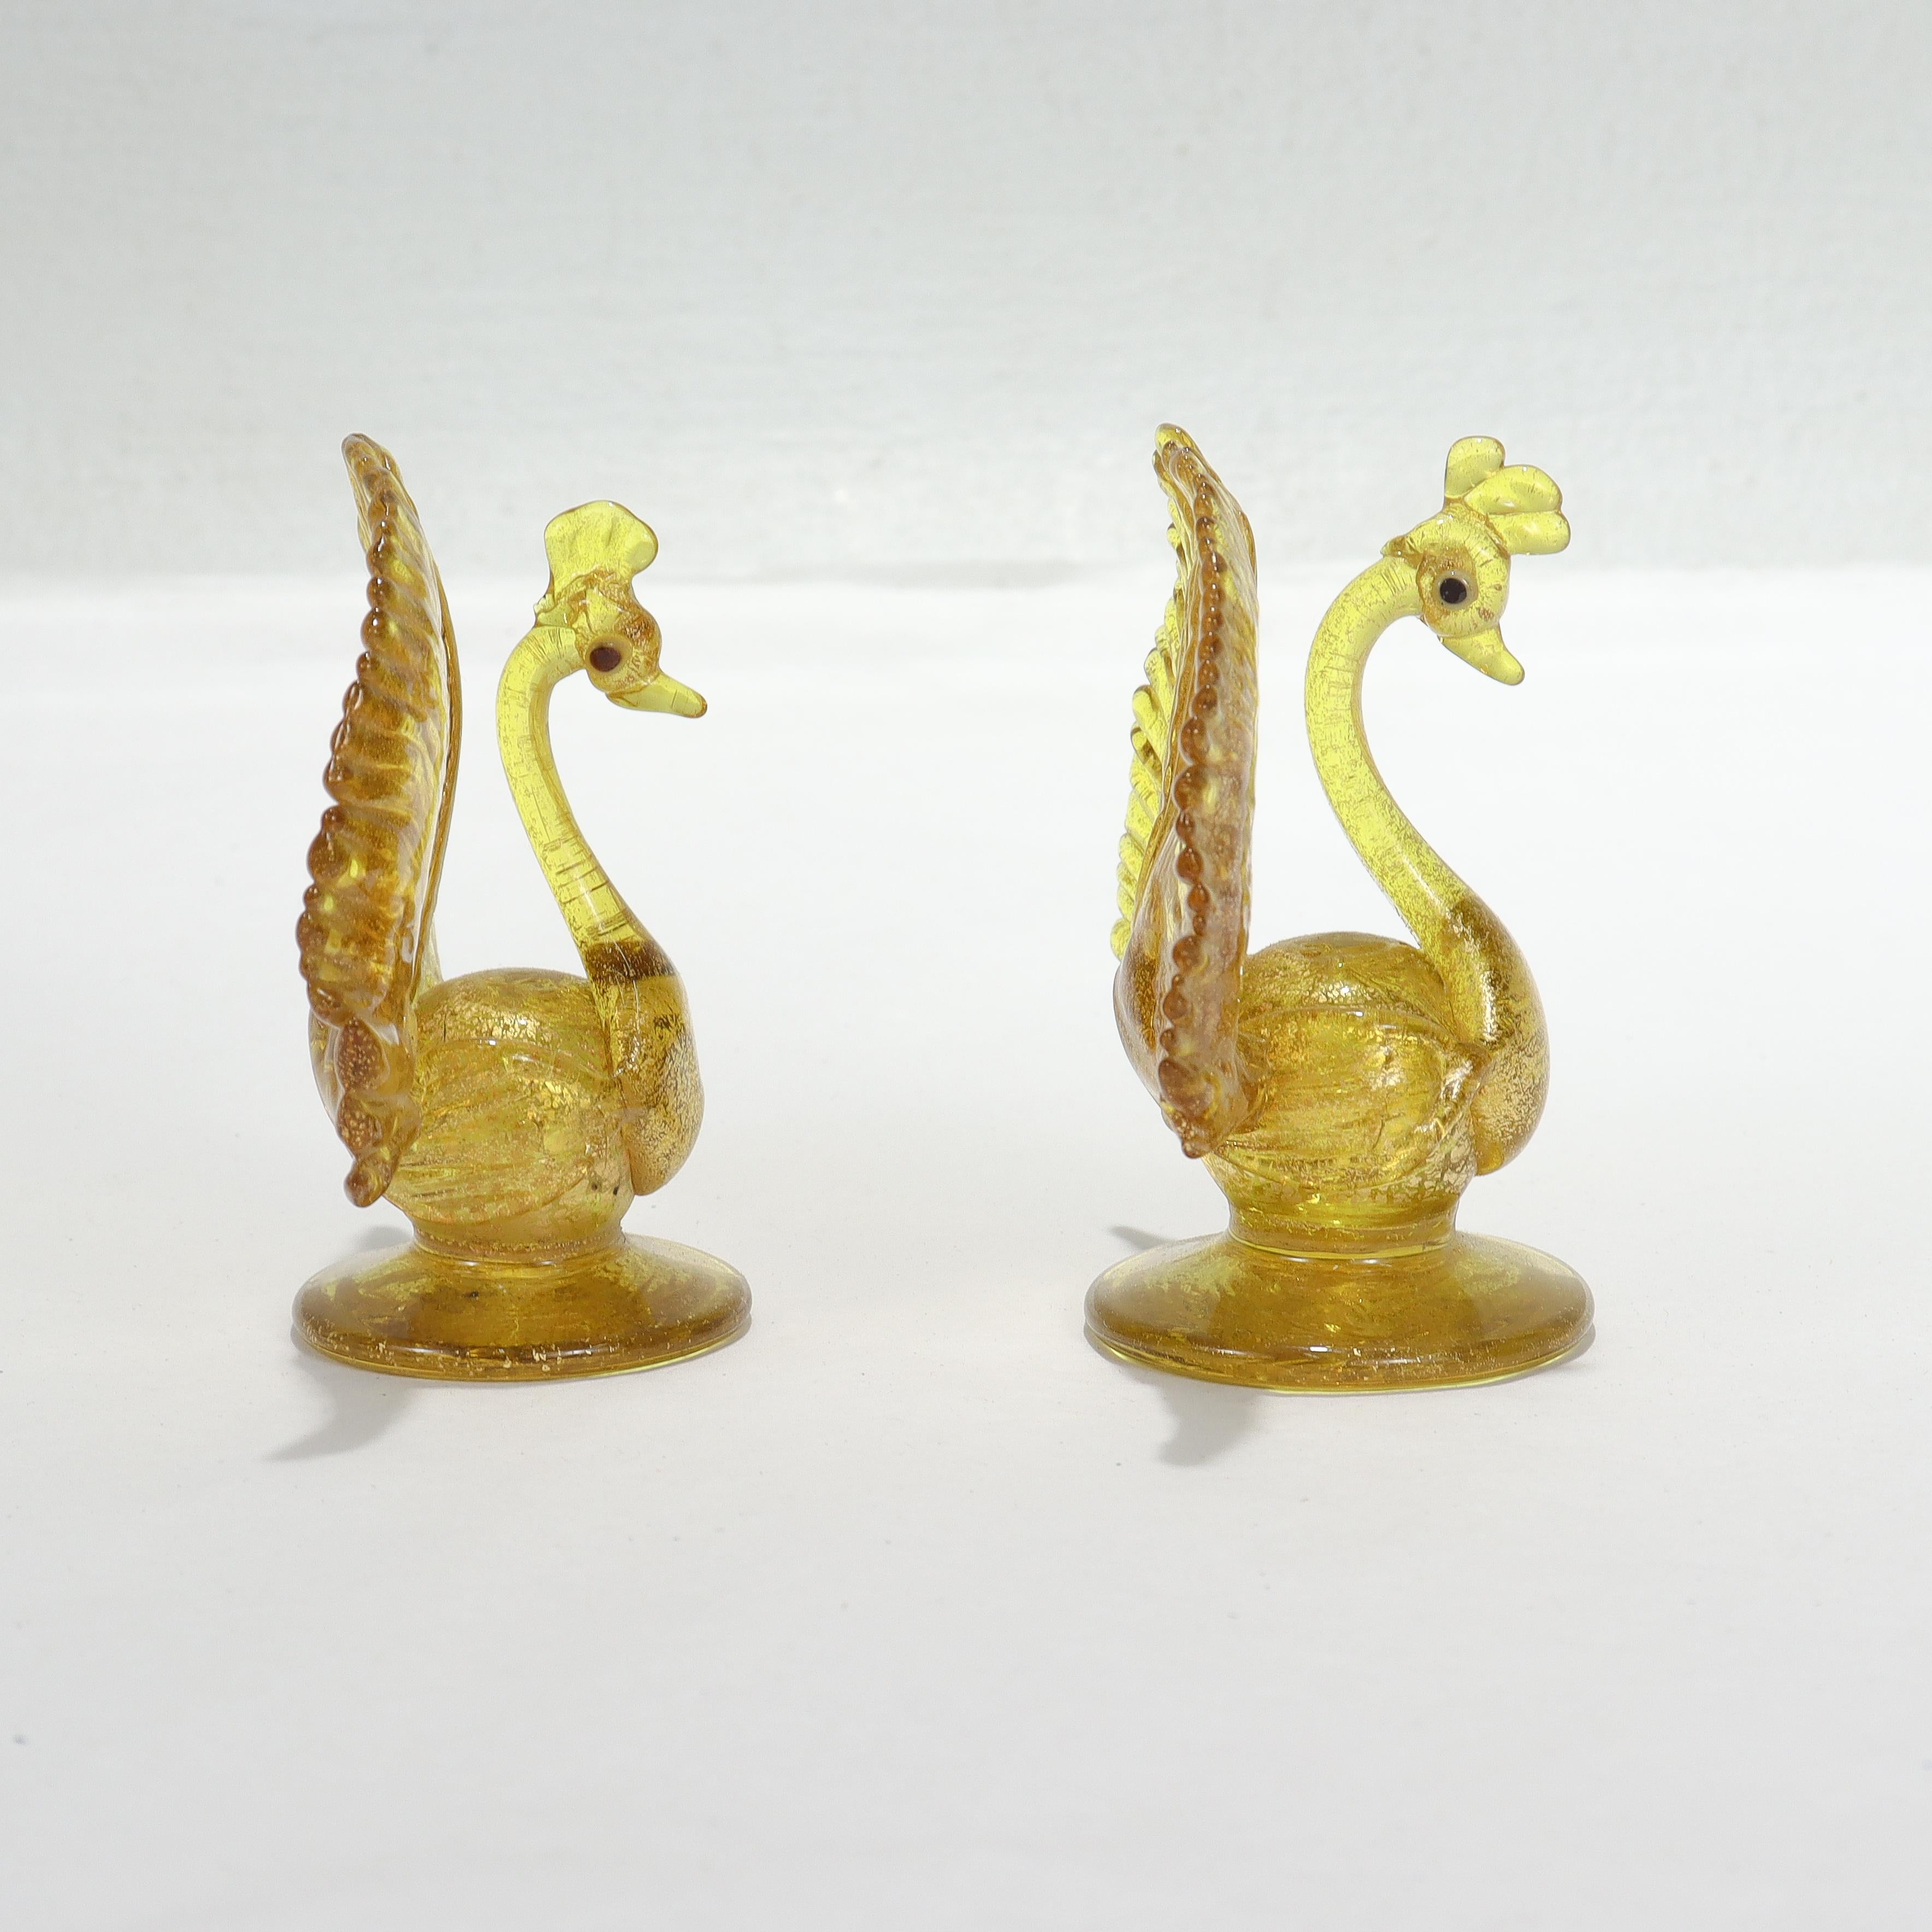 Pair Salviati Attributed Venetian/Murano Glass Peacock Place Card Holder Figures For Sale 2